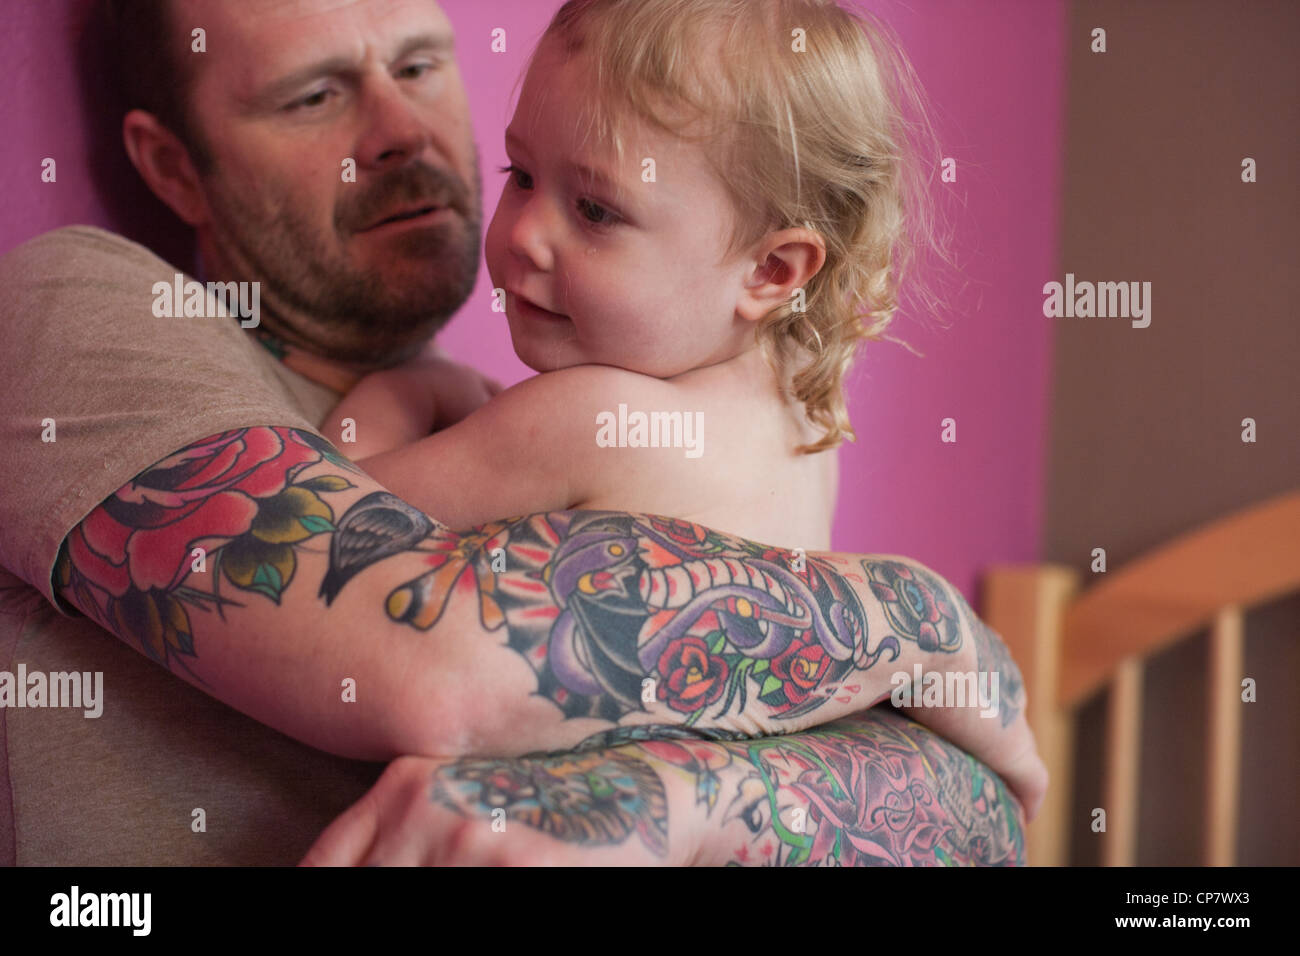 Tattooed dad holds two year old daughter at home in kid's room. Stock Photo